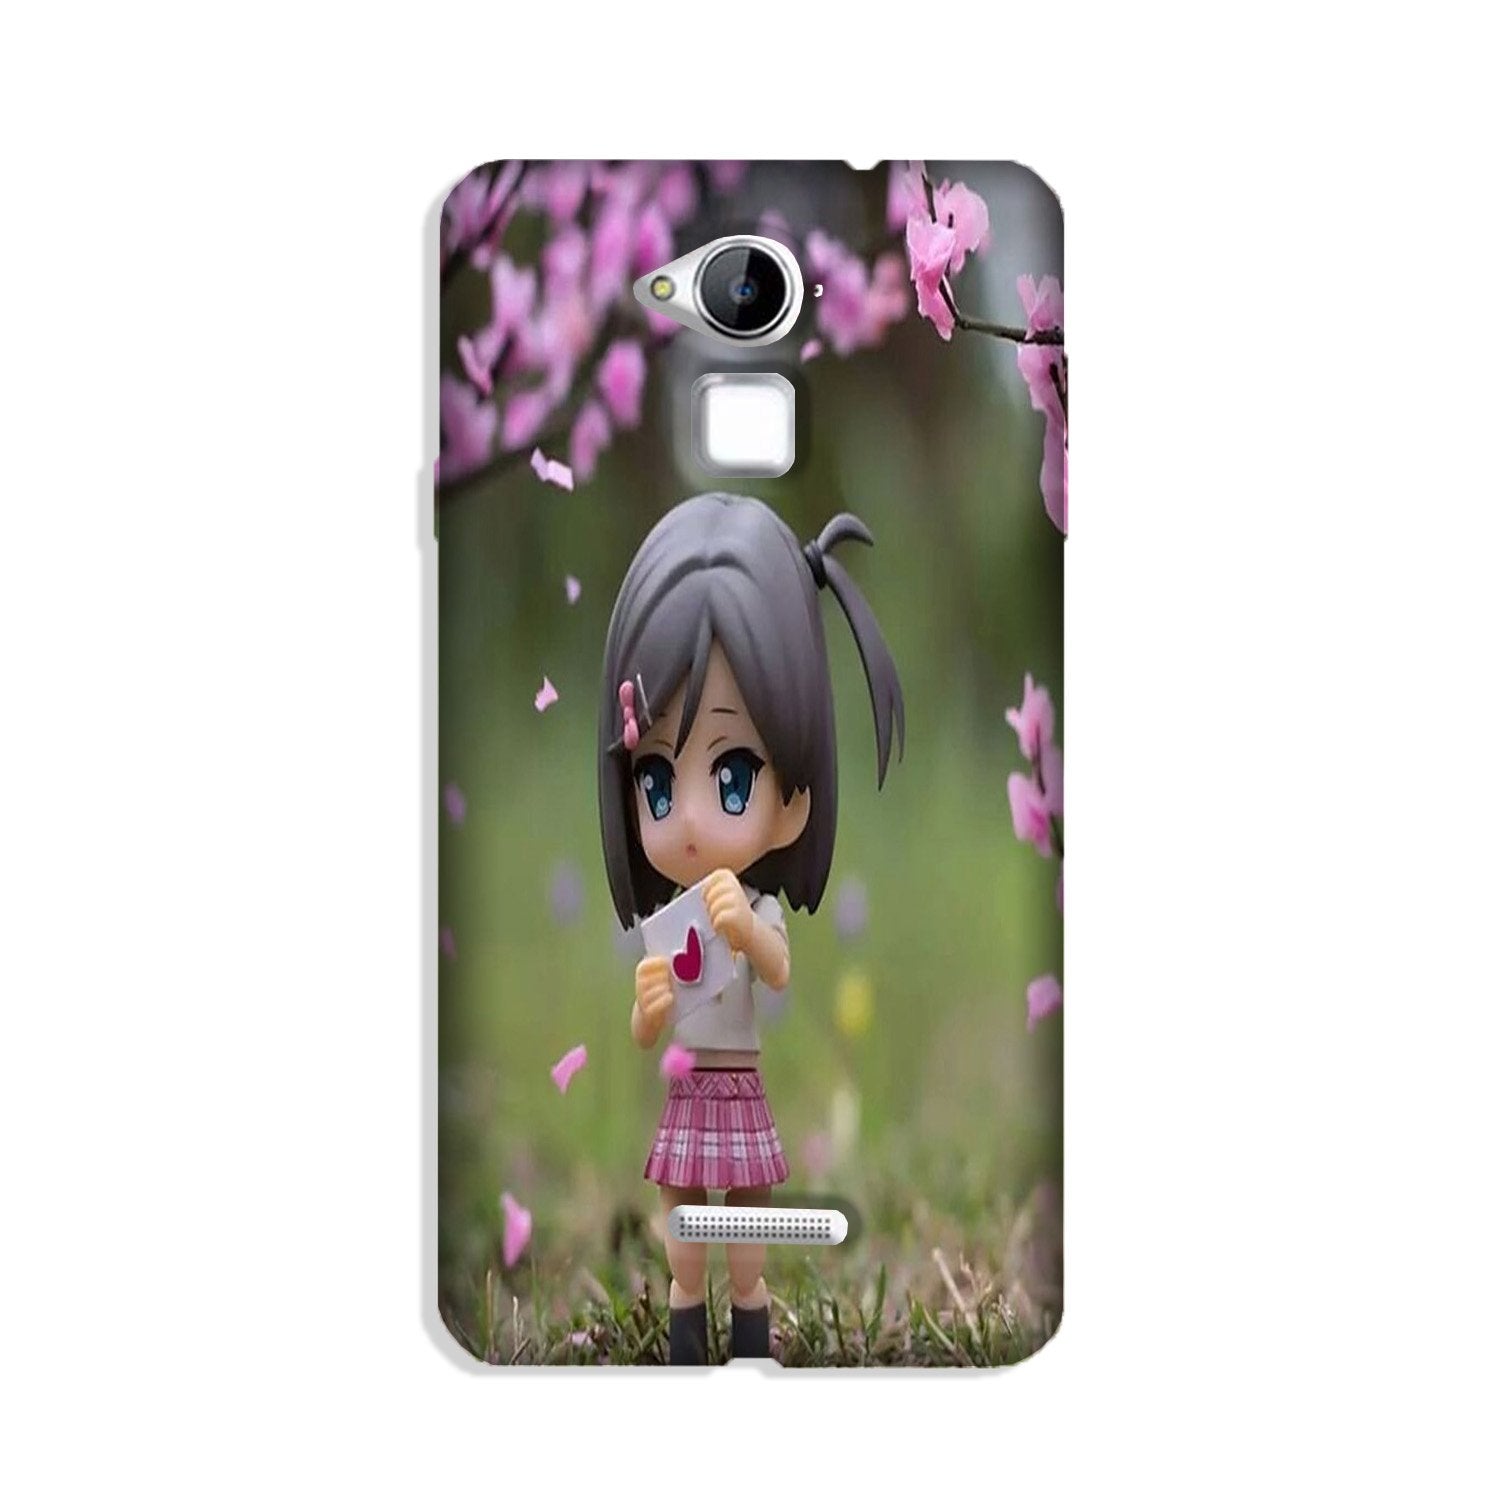 Cute Girl Case for Coolpad Note 3